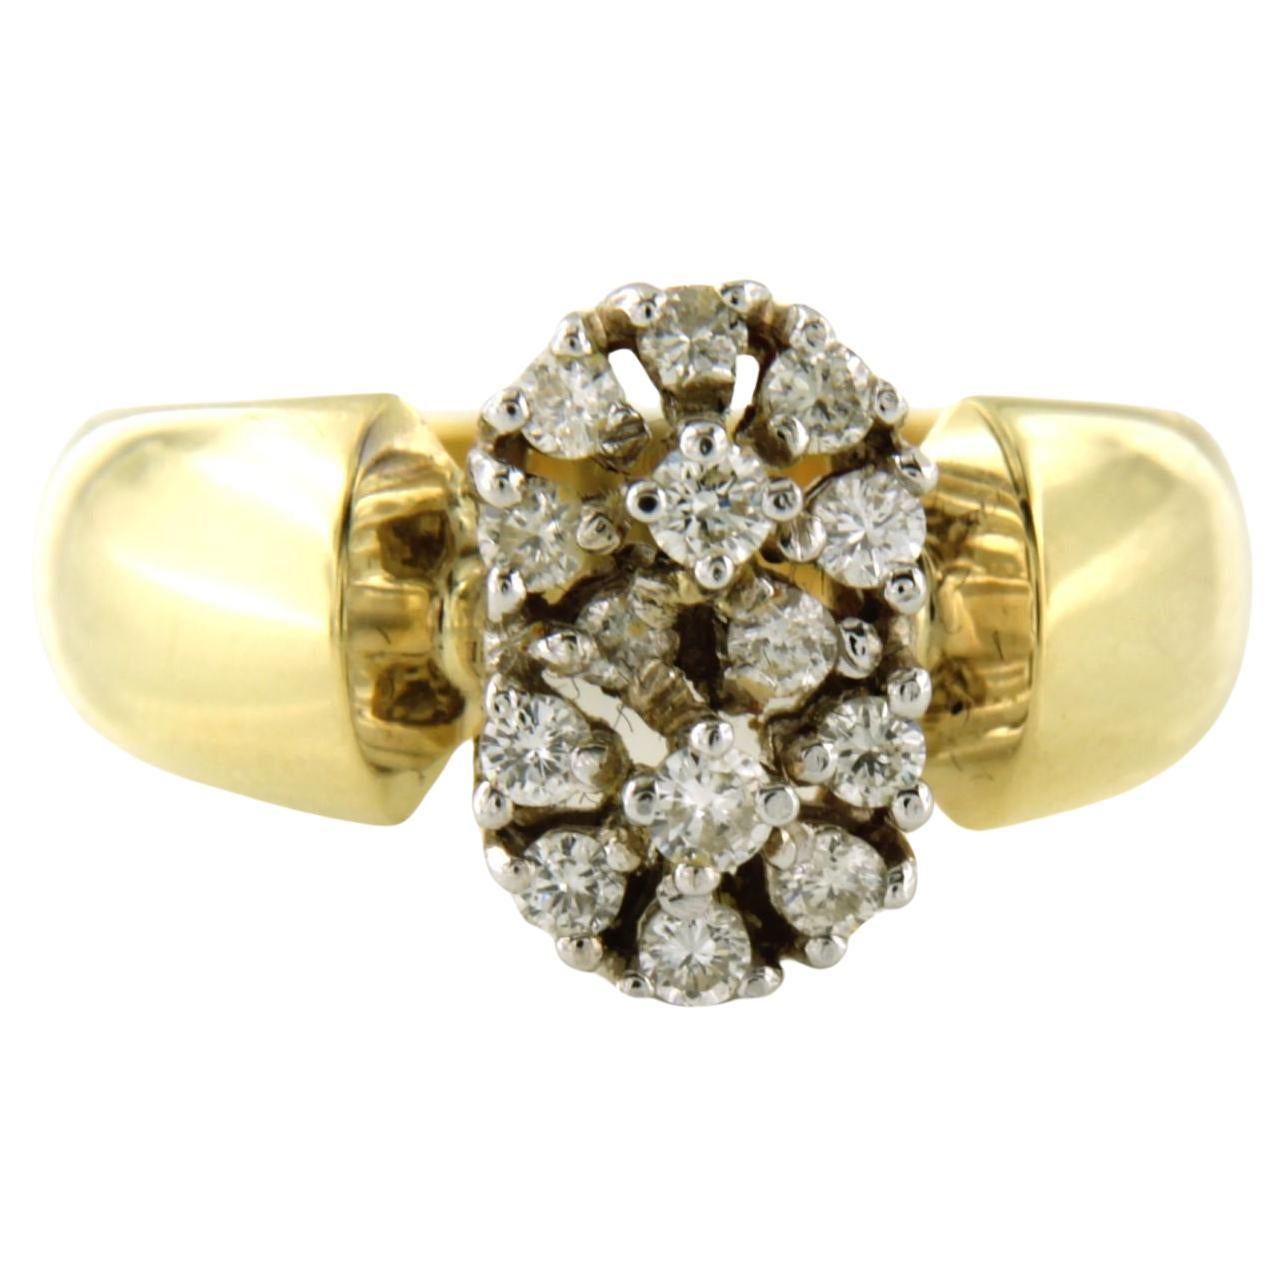 18k bicolour gold ring set with brilliant cut diamonds up to . 0.35ct - F/G - VS/SI - ring size 7.25 (17.5/55)

detailed description:

the top of the ring is 1.2 cm wide

Total weight 6.6 grams

ring size 7.25 (17.5/55), ring can be enlarged or